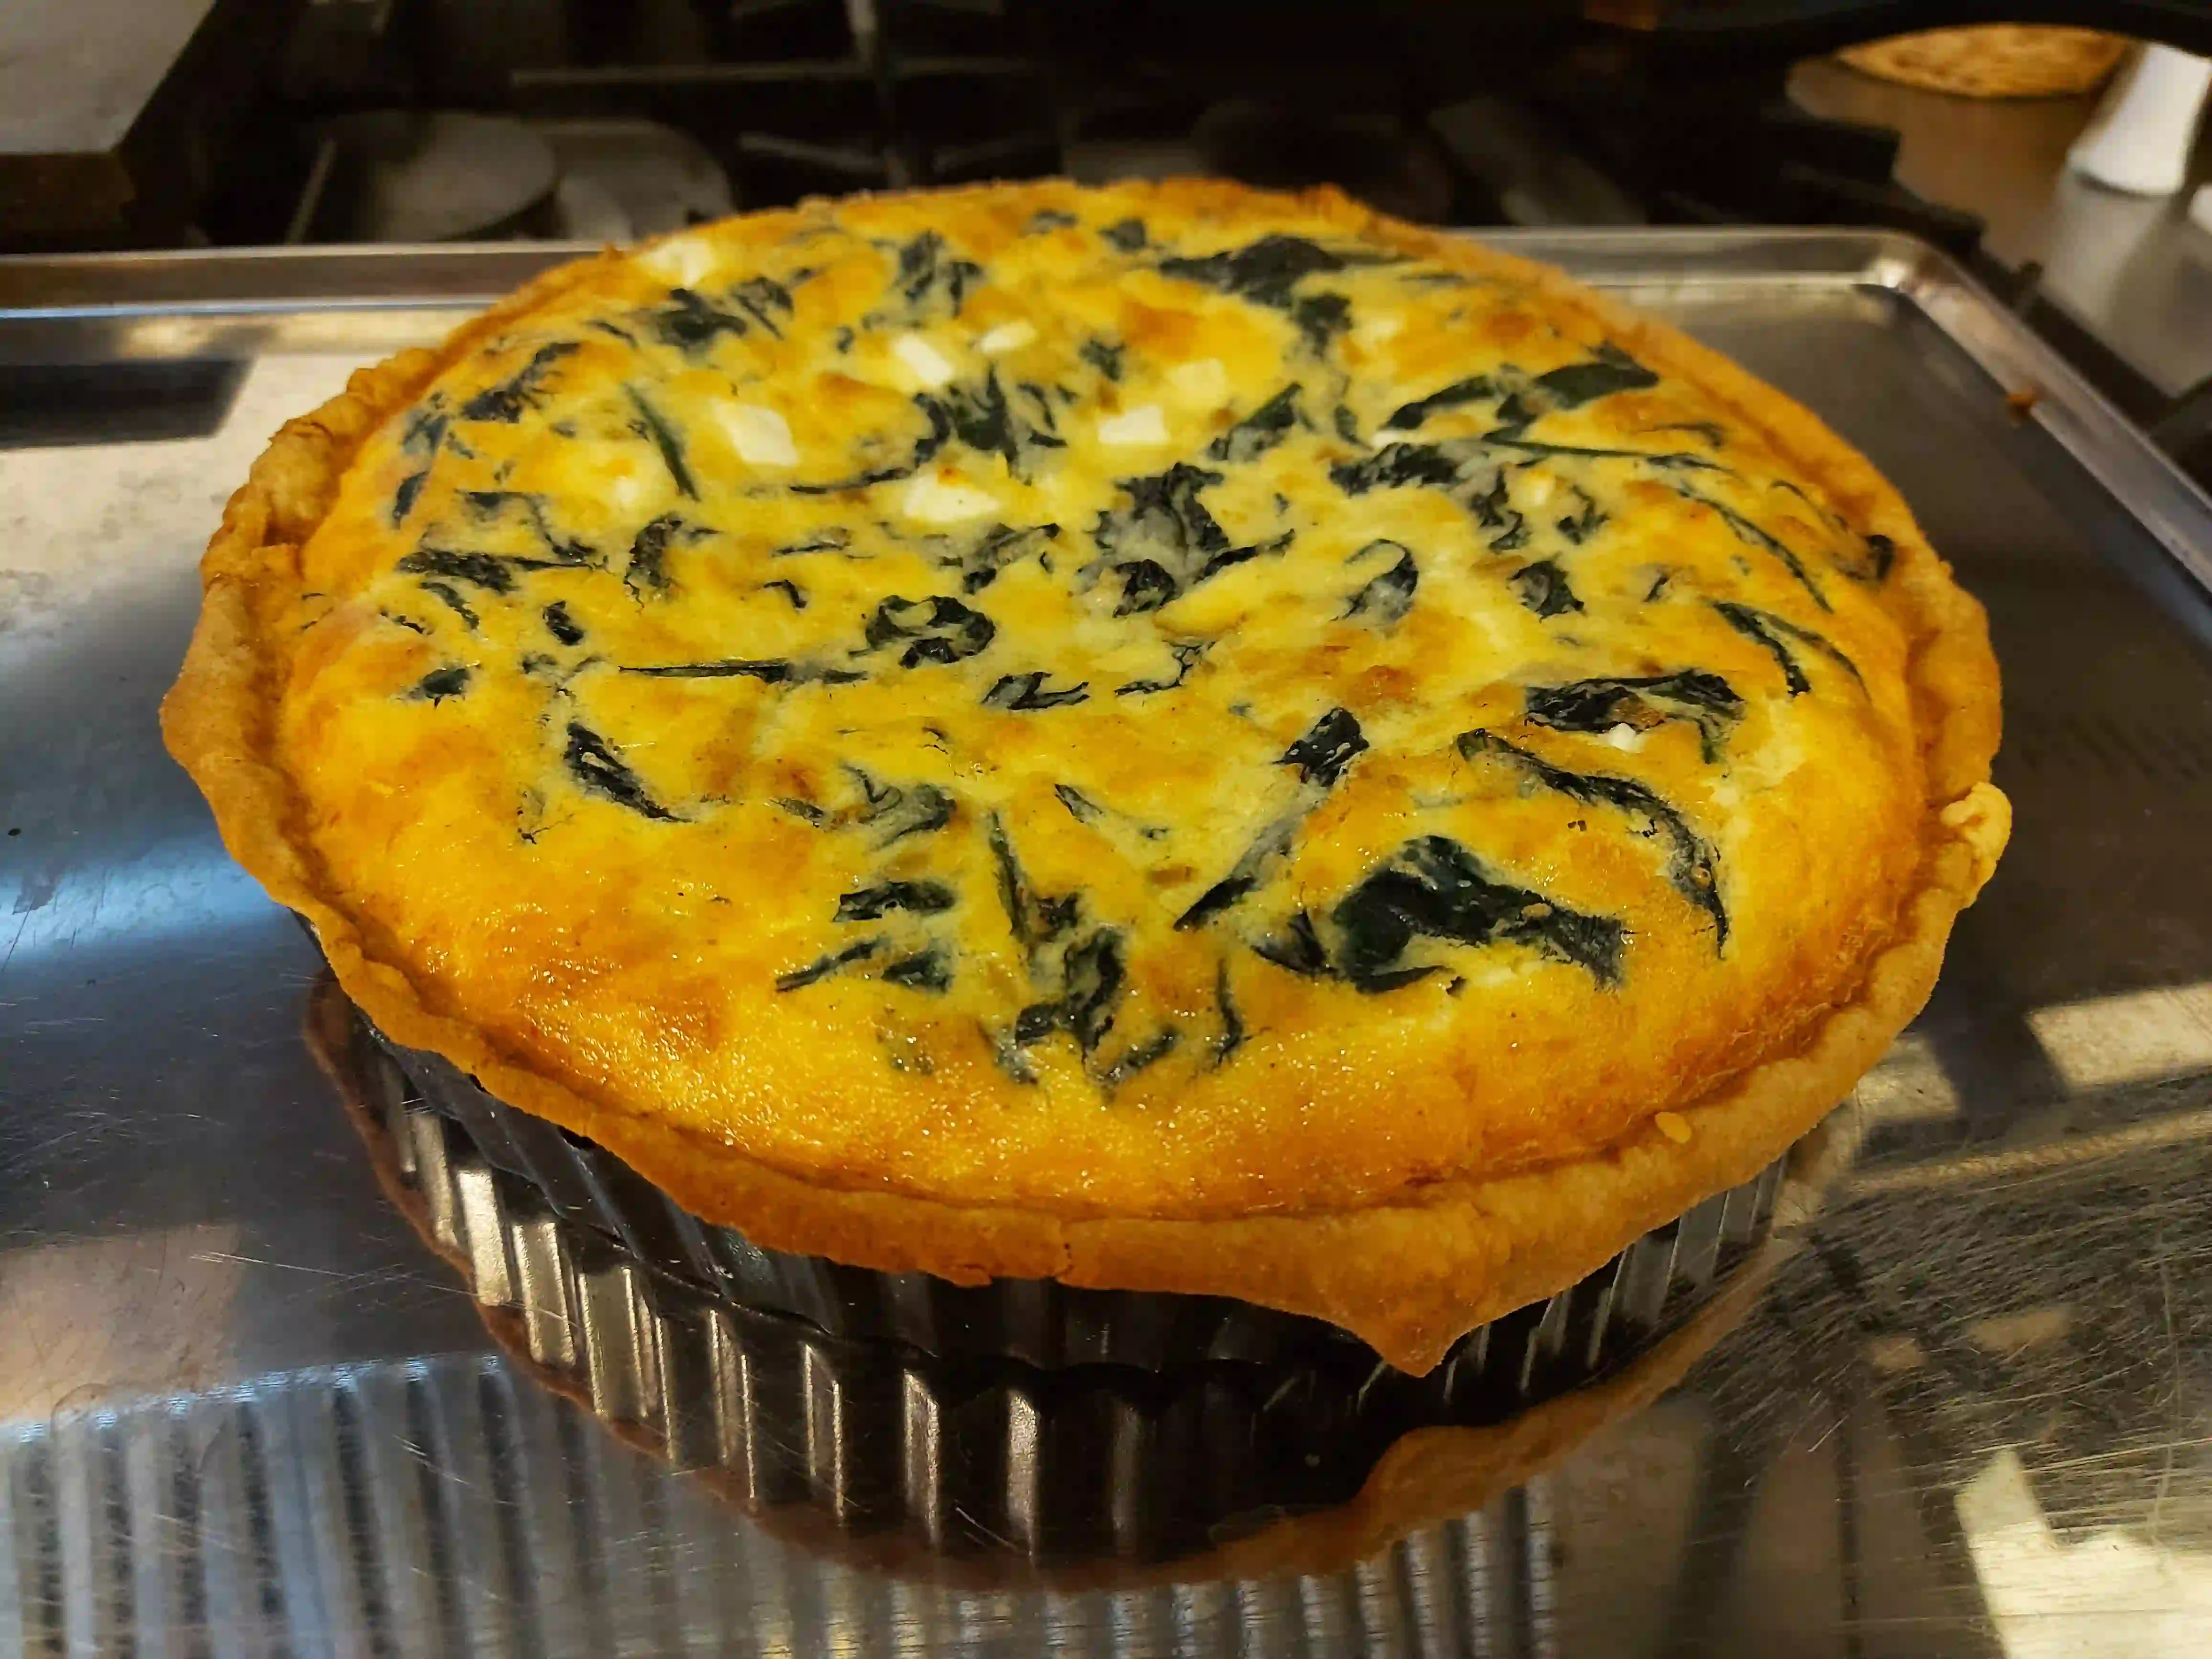 Home-made spinach and feta quiche